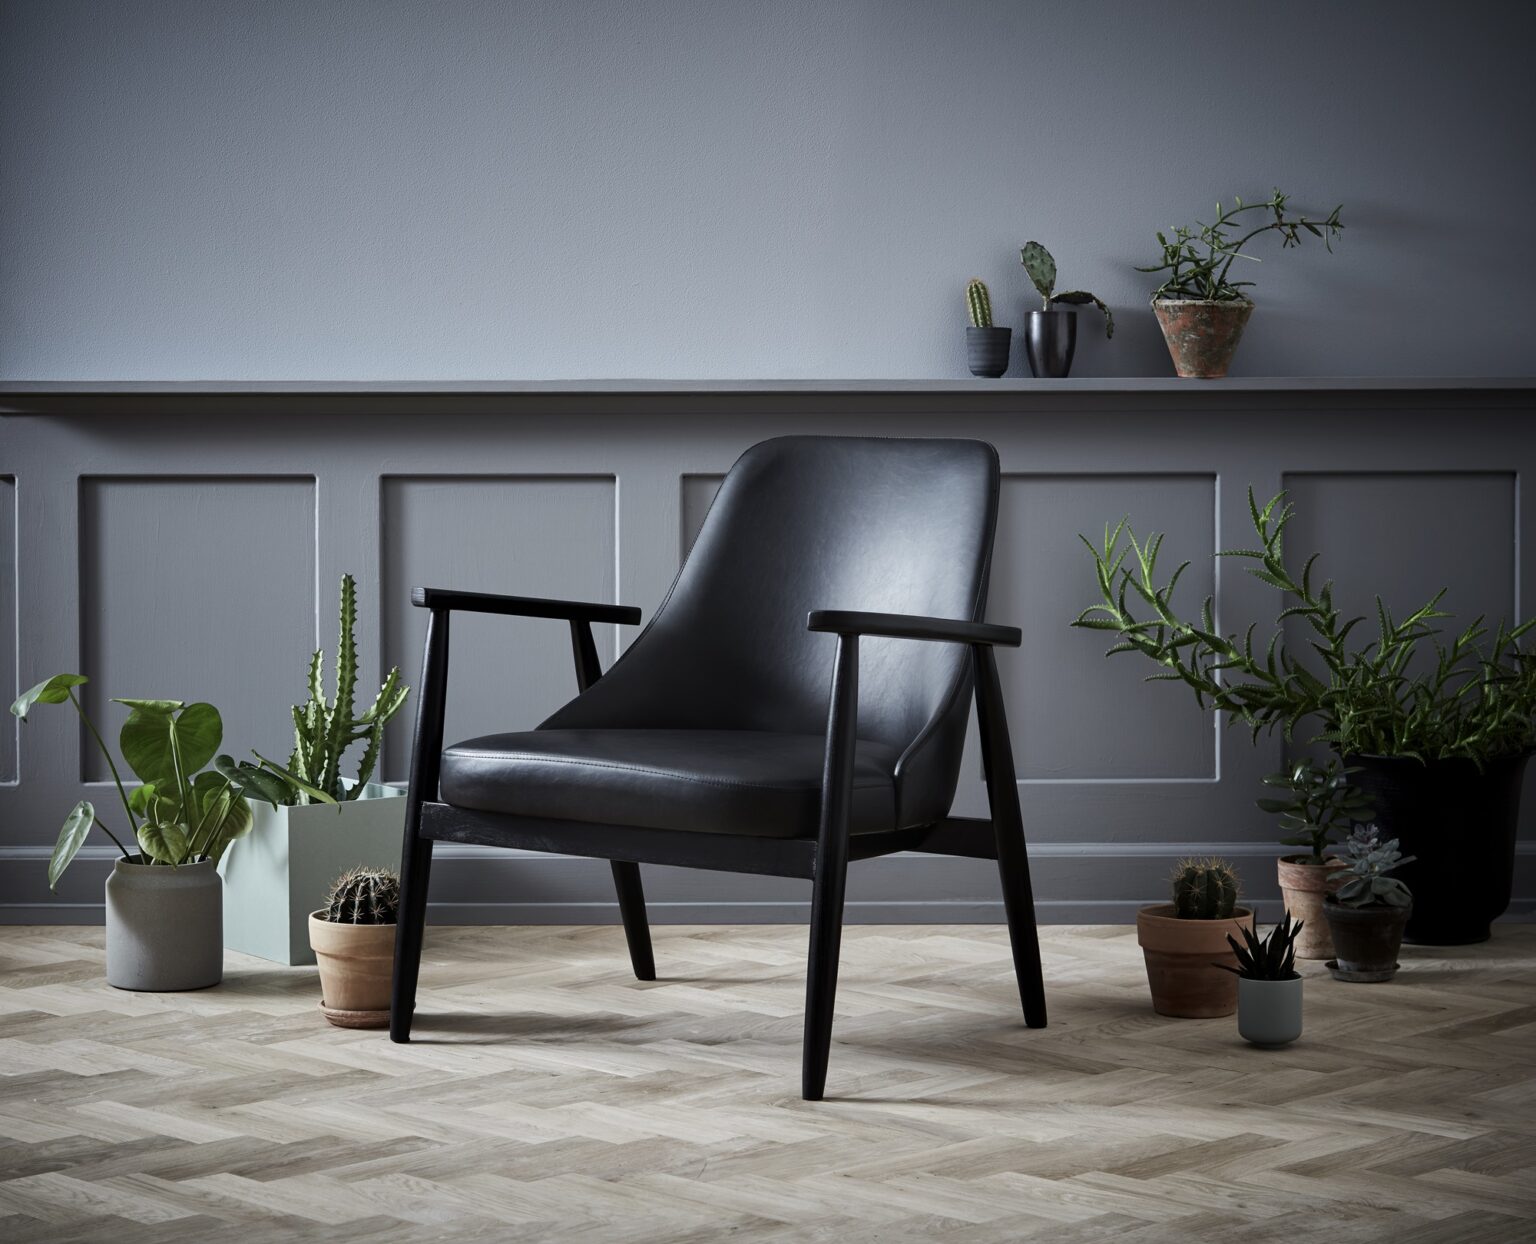 saga-lounge-chair-vintage-black-art-leather-with-black-stained-ash-700200270-mood-lifestyle-01